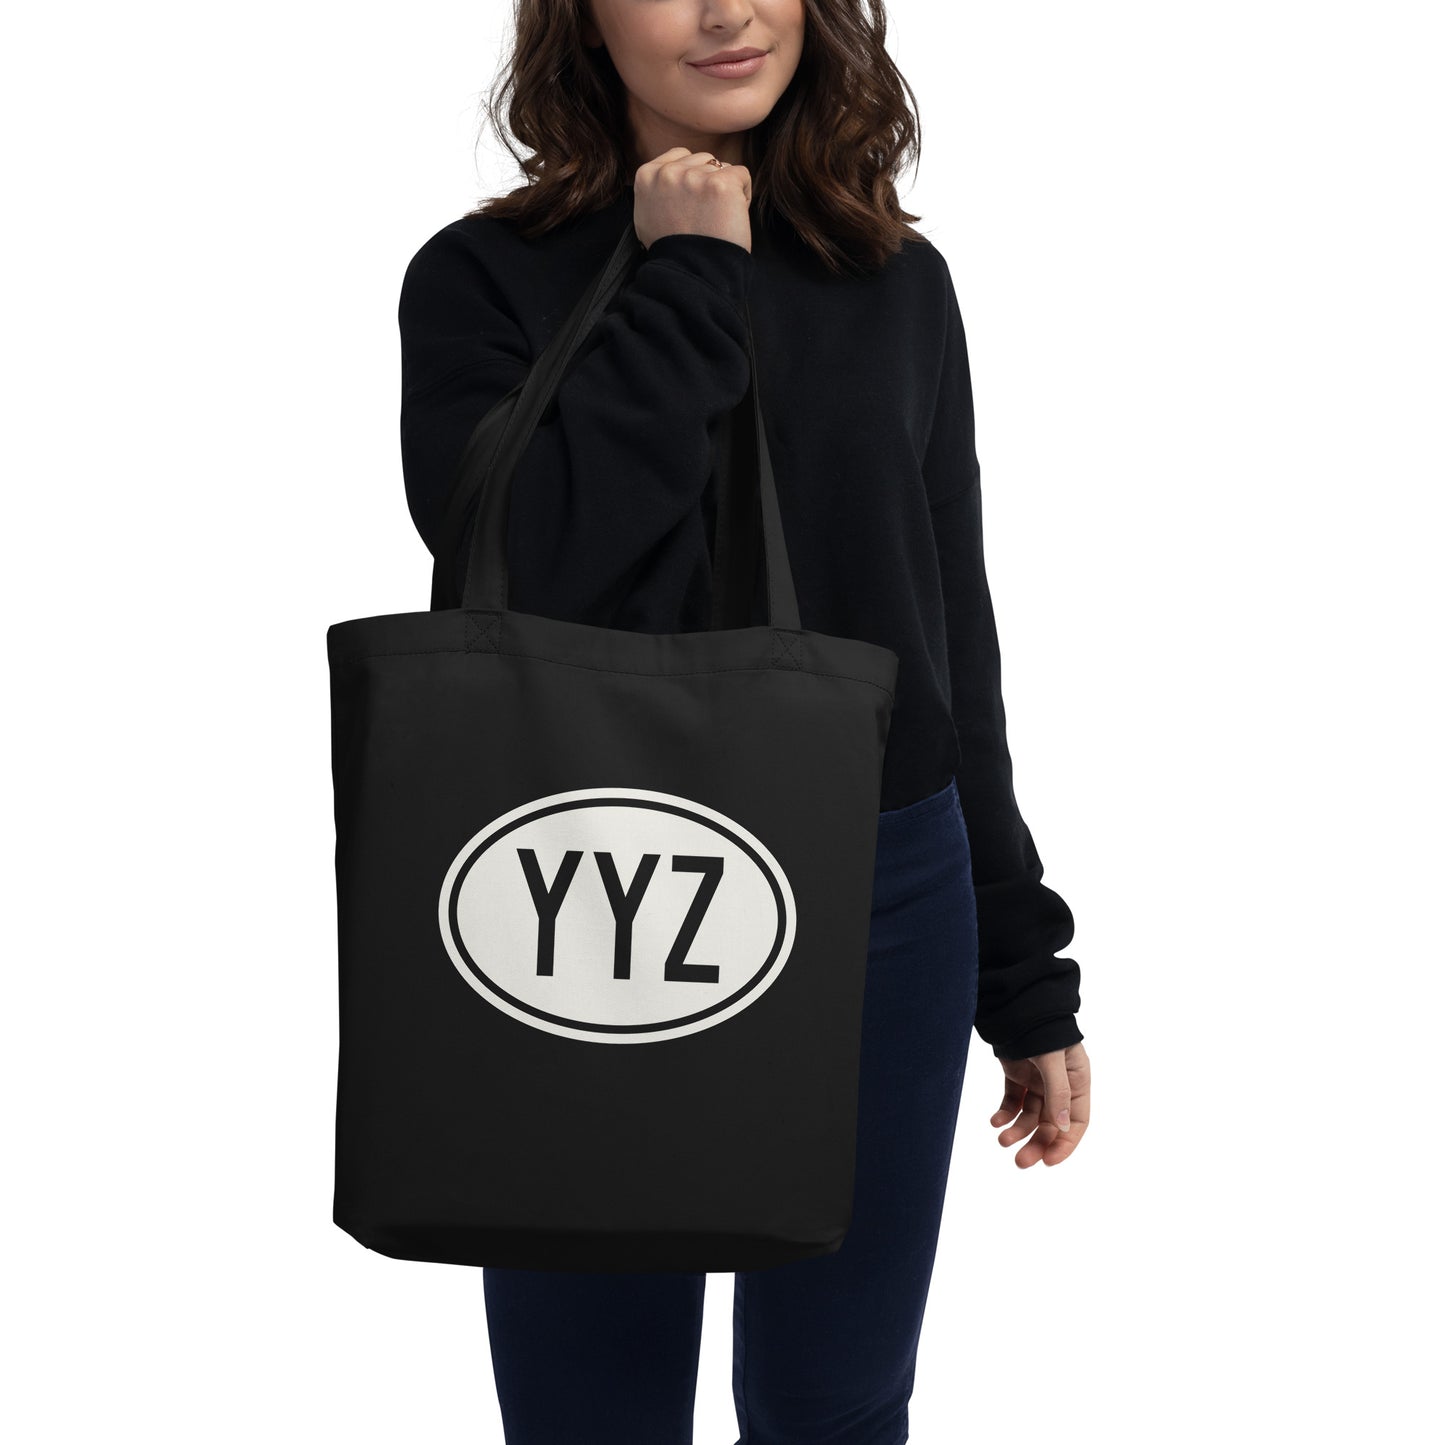 Unique Travel Gift Organic Tote - White Oval • YYZ Toronto • YHM Designs - Image 03